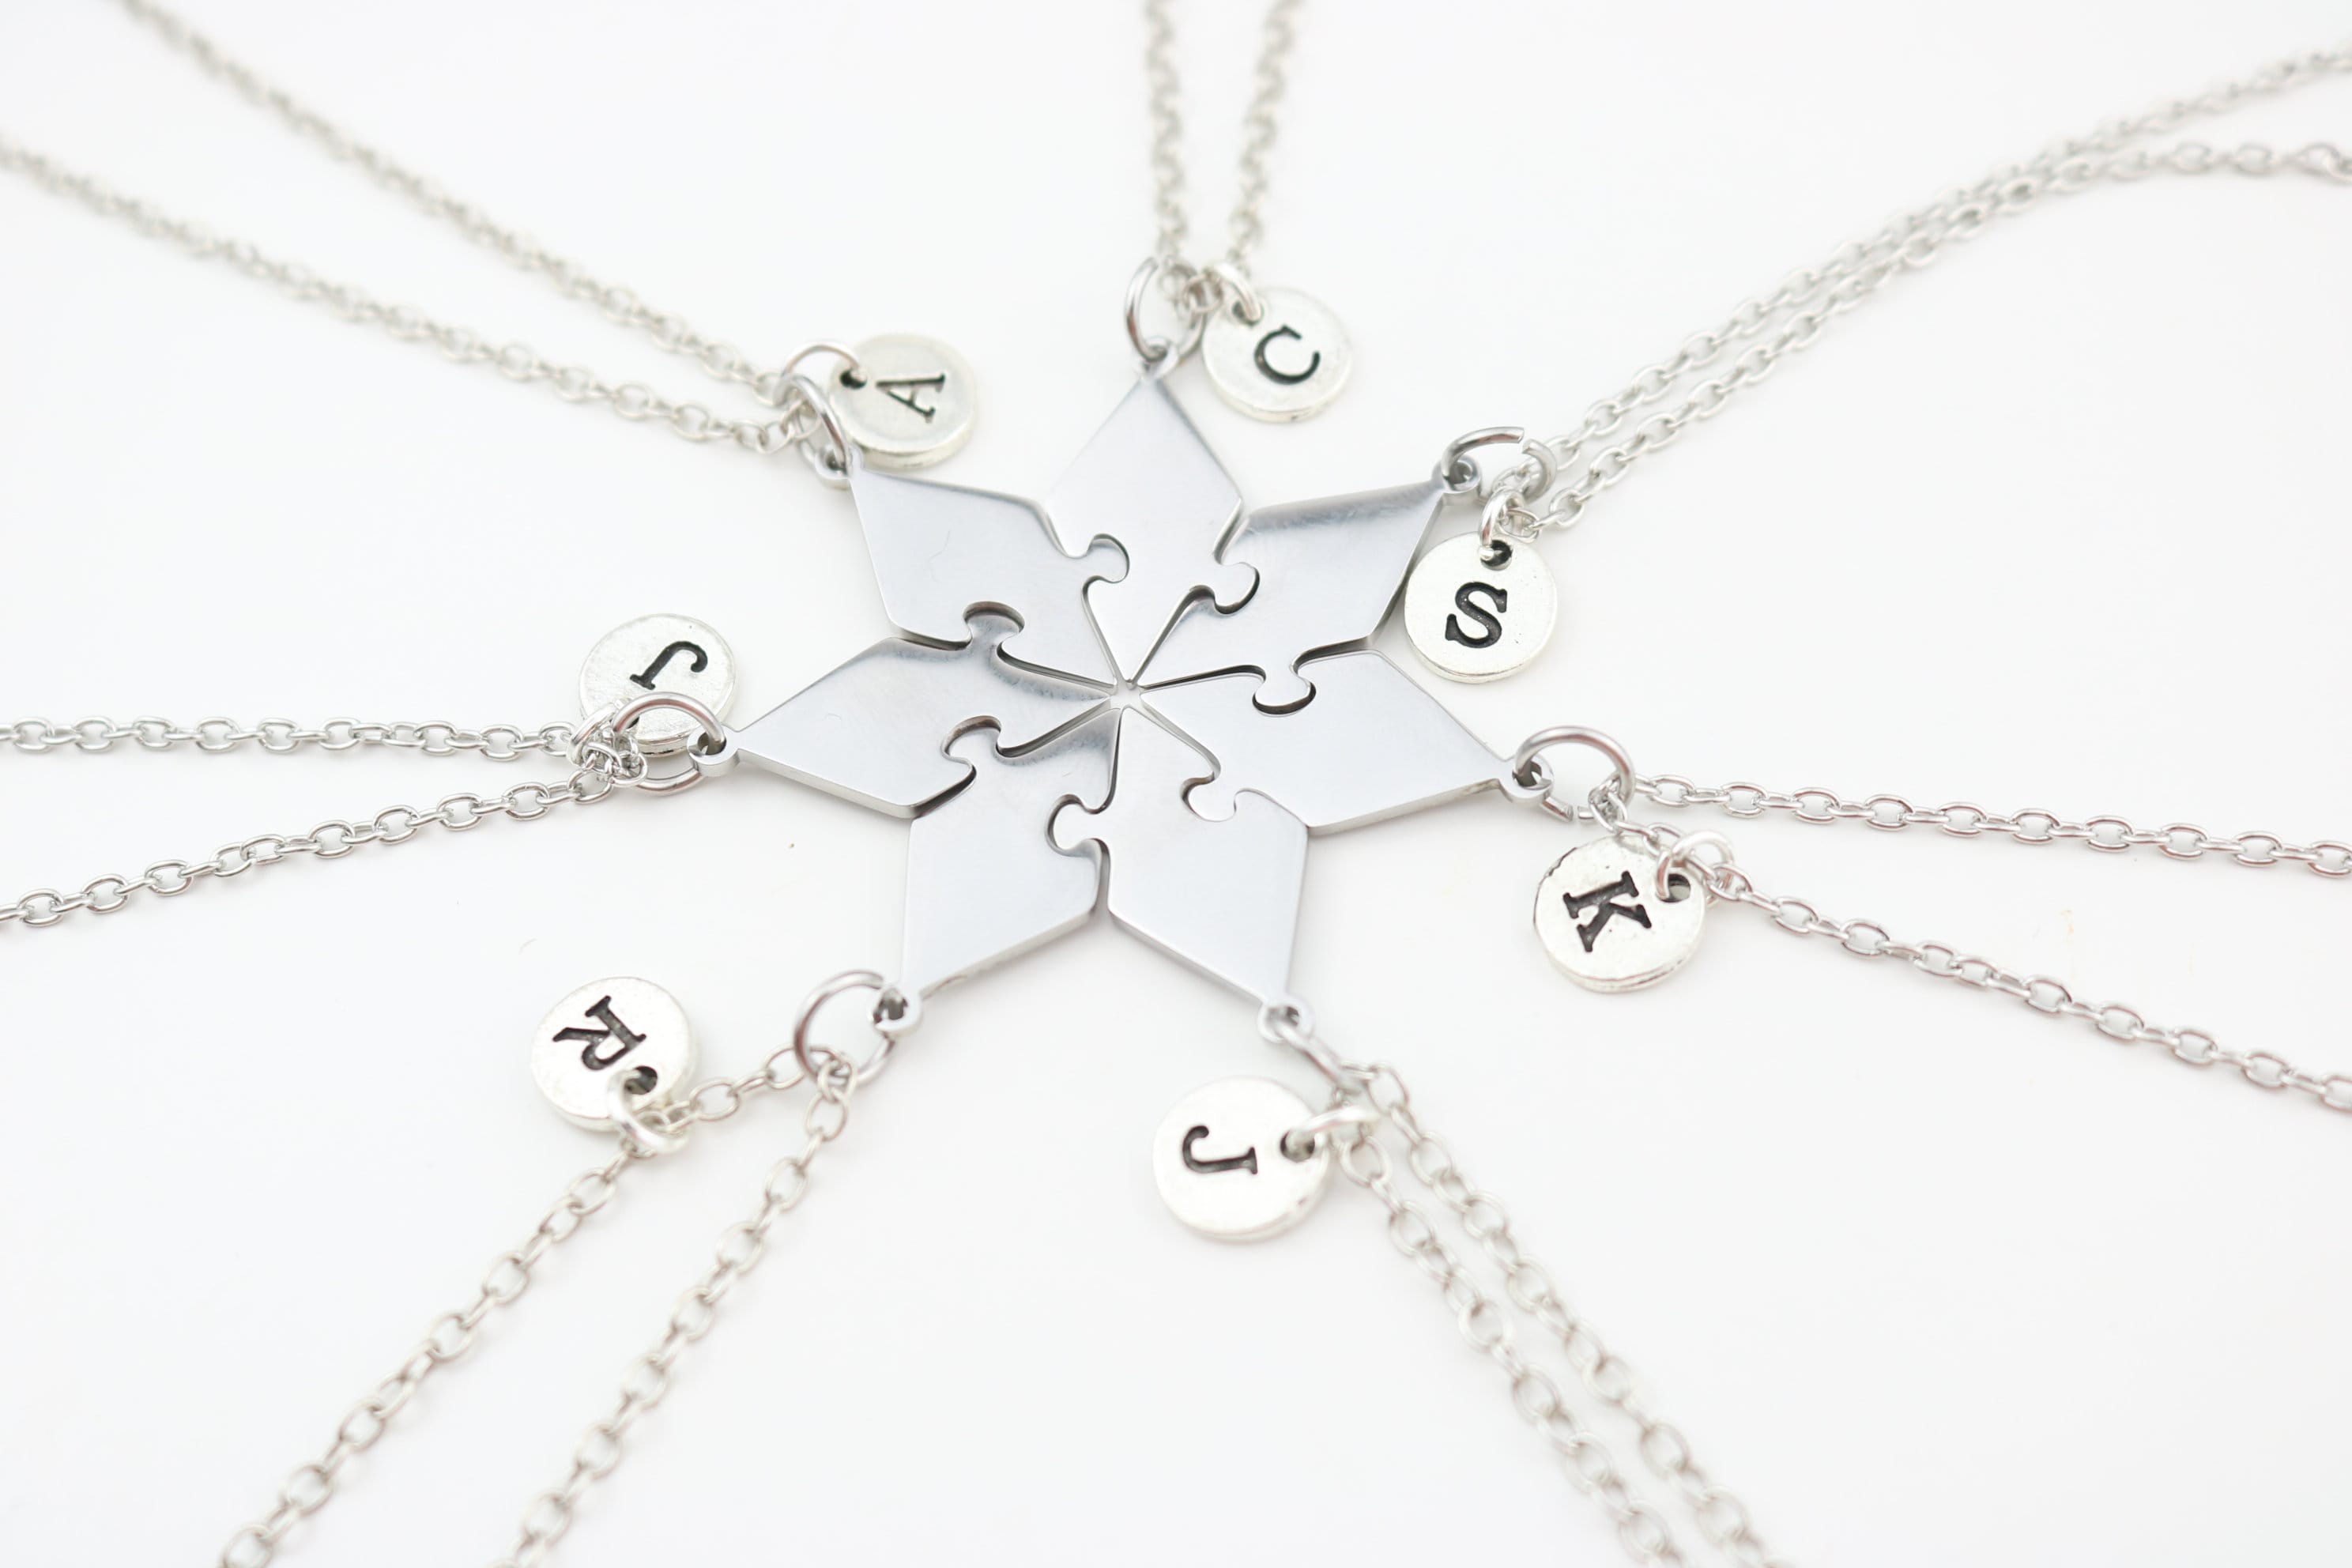 Matching Necklaces for Friends 2-7 Pieces Silver